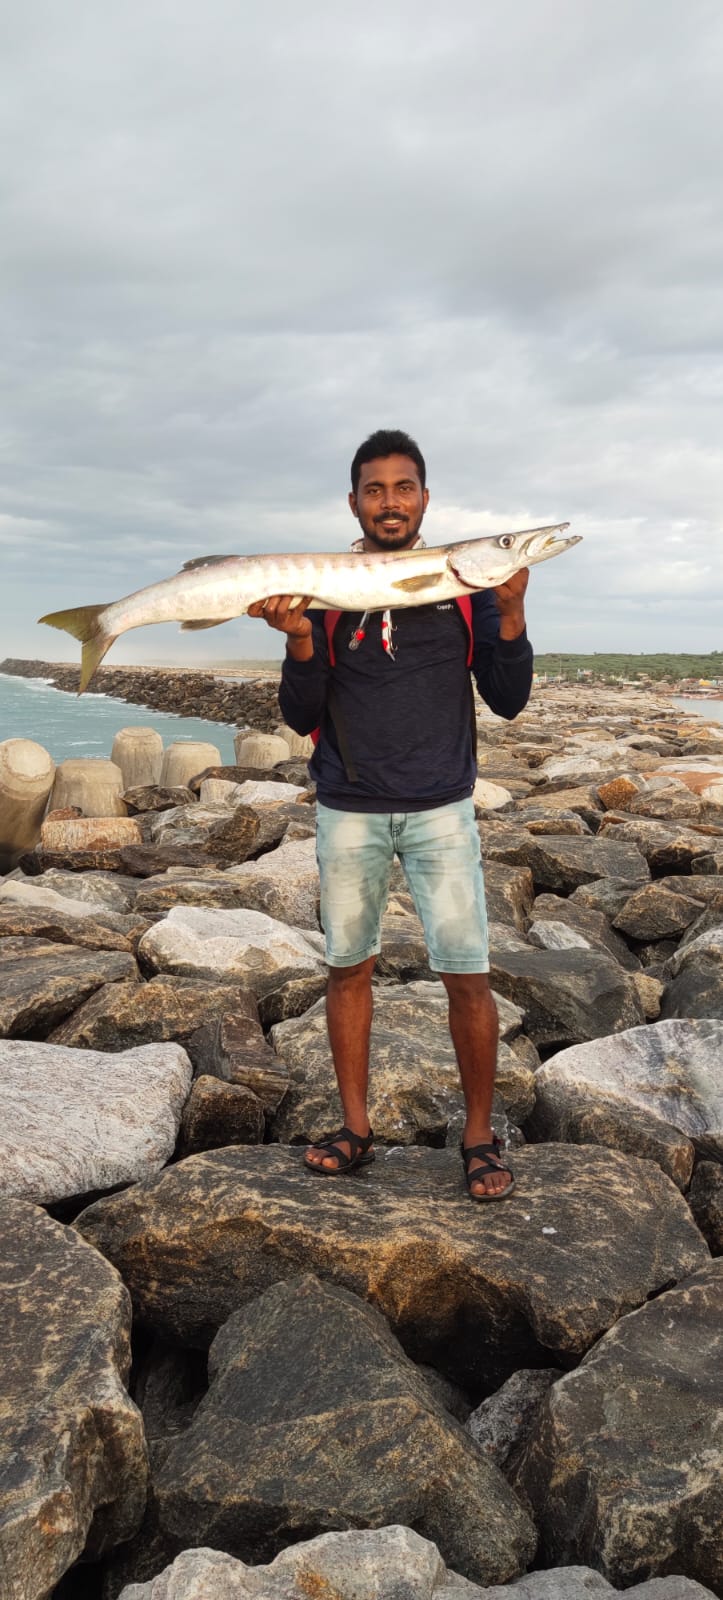 Angler Jerome Asir: Tales of Fishing Adventures & Favorite Gear